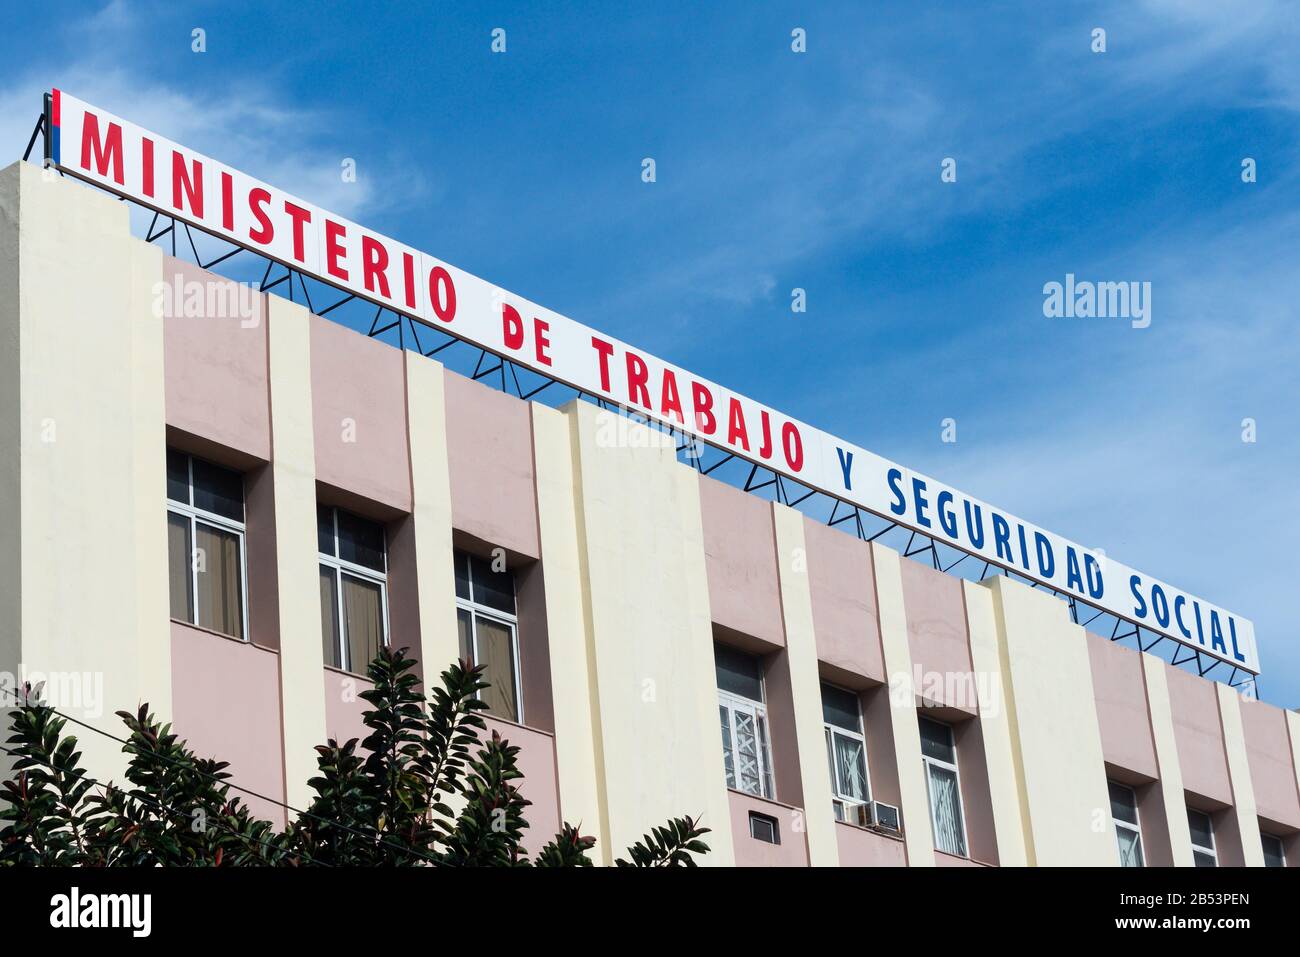 'Ministerio de Trabajo y Seguridad Social' means Ministry of Labour and Social Security in Spanish. Government building located in Havana, Cuba. Stock Photo